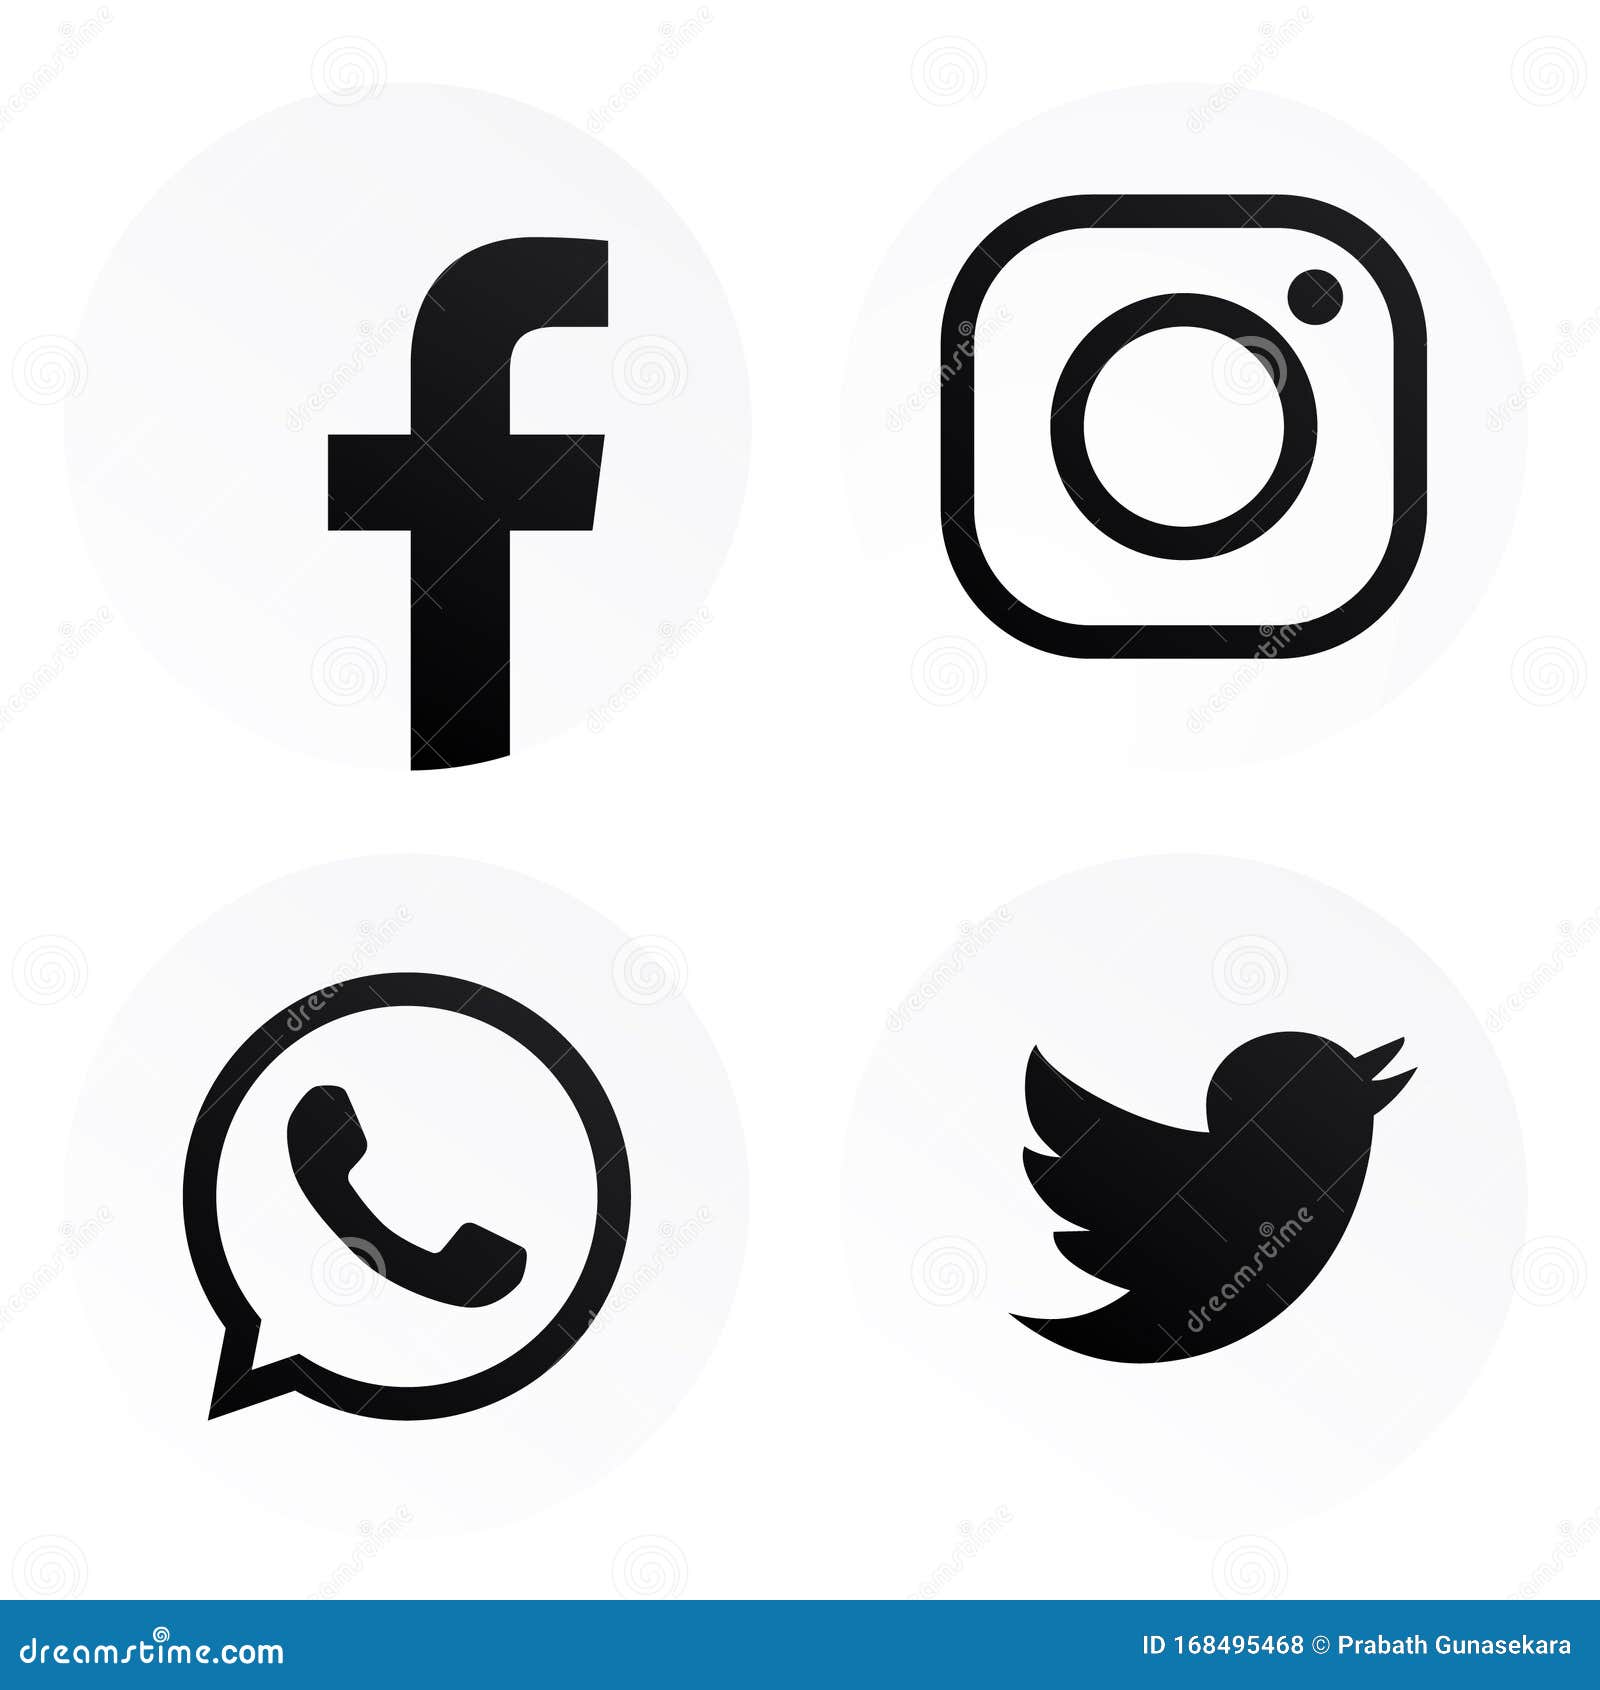 Facebook Instagram Whatsapp Twitter Logos with Black Color & White  Background Editorial Stock Photo - Illustration of beautiful, pngwhatsapp:  168495468